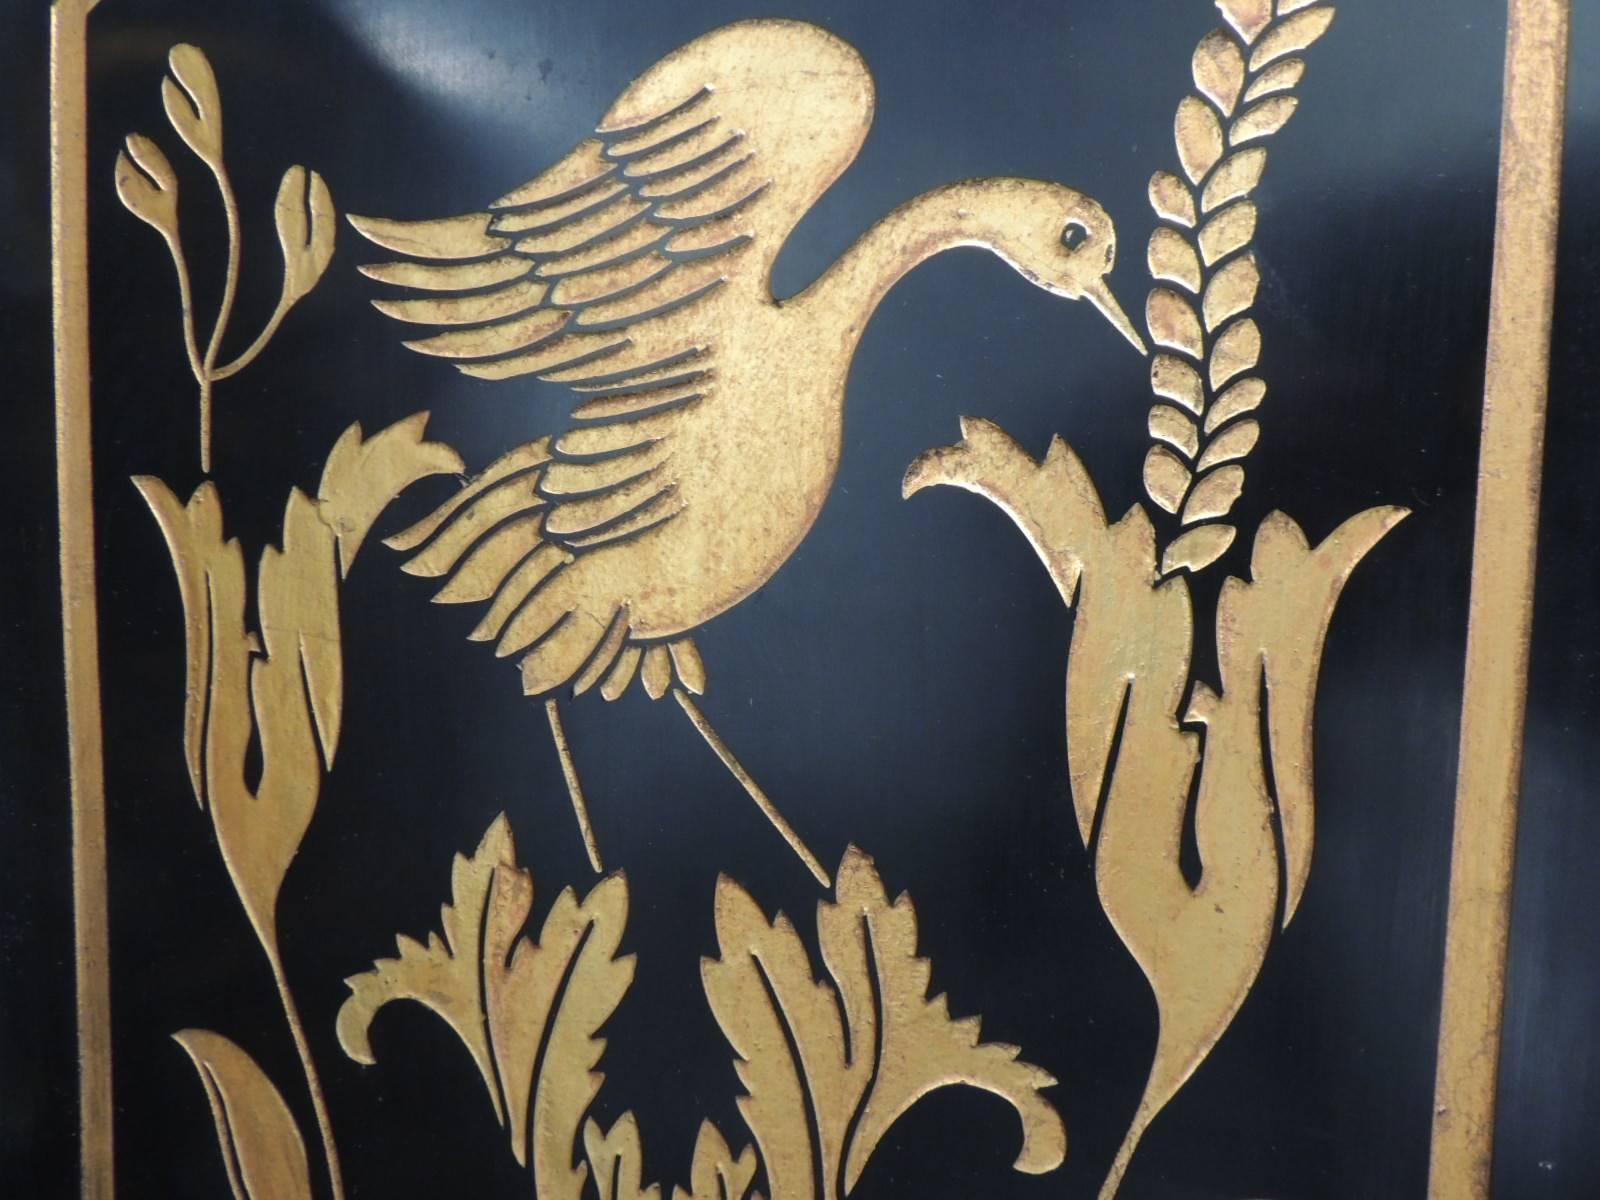 Modern black and gold lacquered folding screens with birds
Folding screens in black and gold depicting flowers and birds with small brass feet and brass hinges. Rectangular panels with rounded tops and gold leaf onto black lacquered wood.
Back of